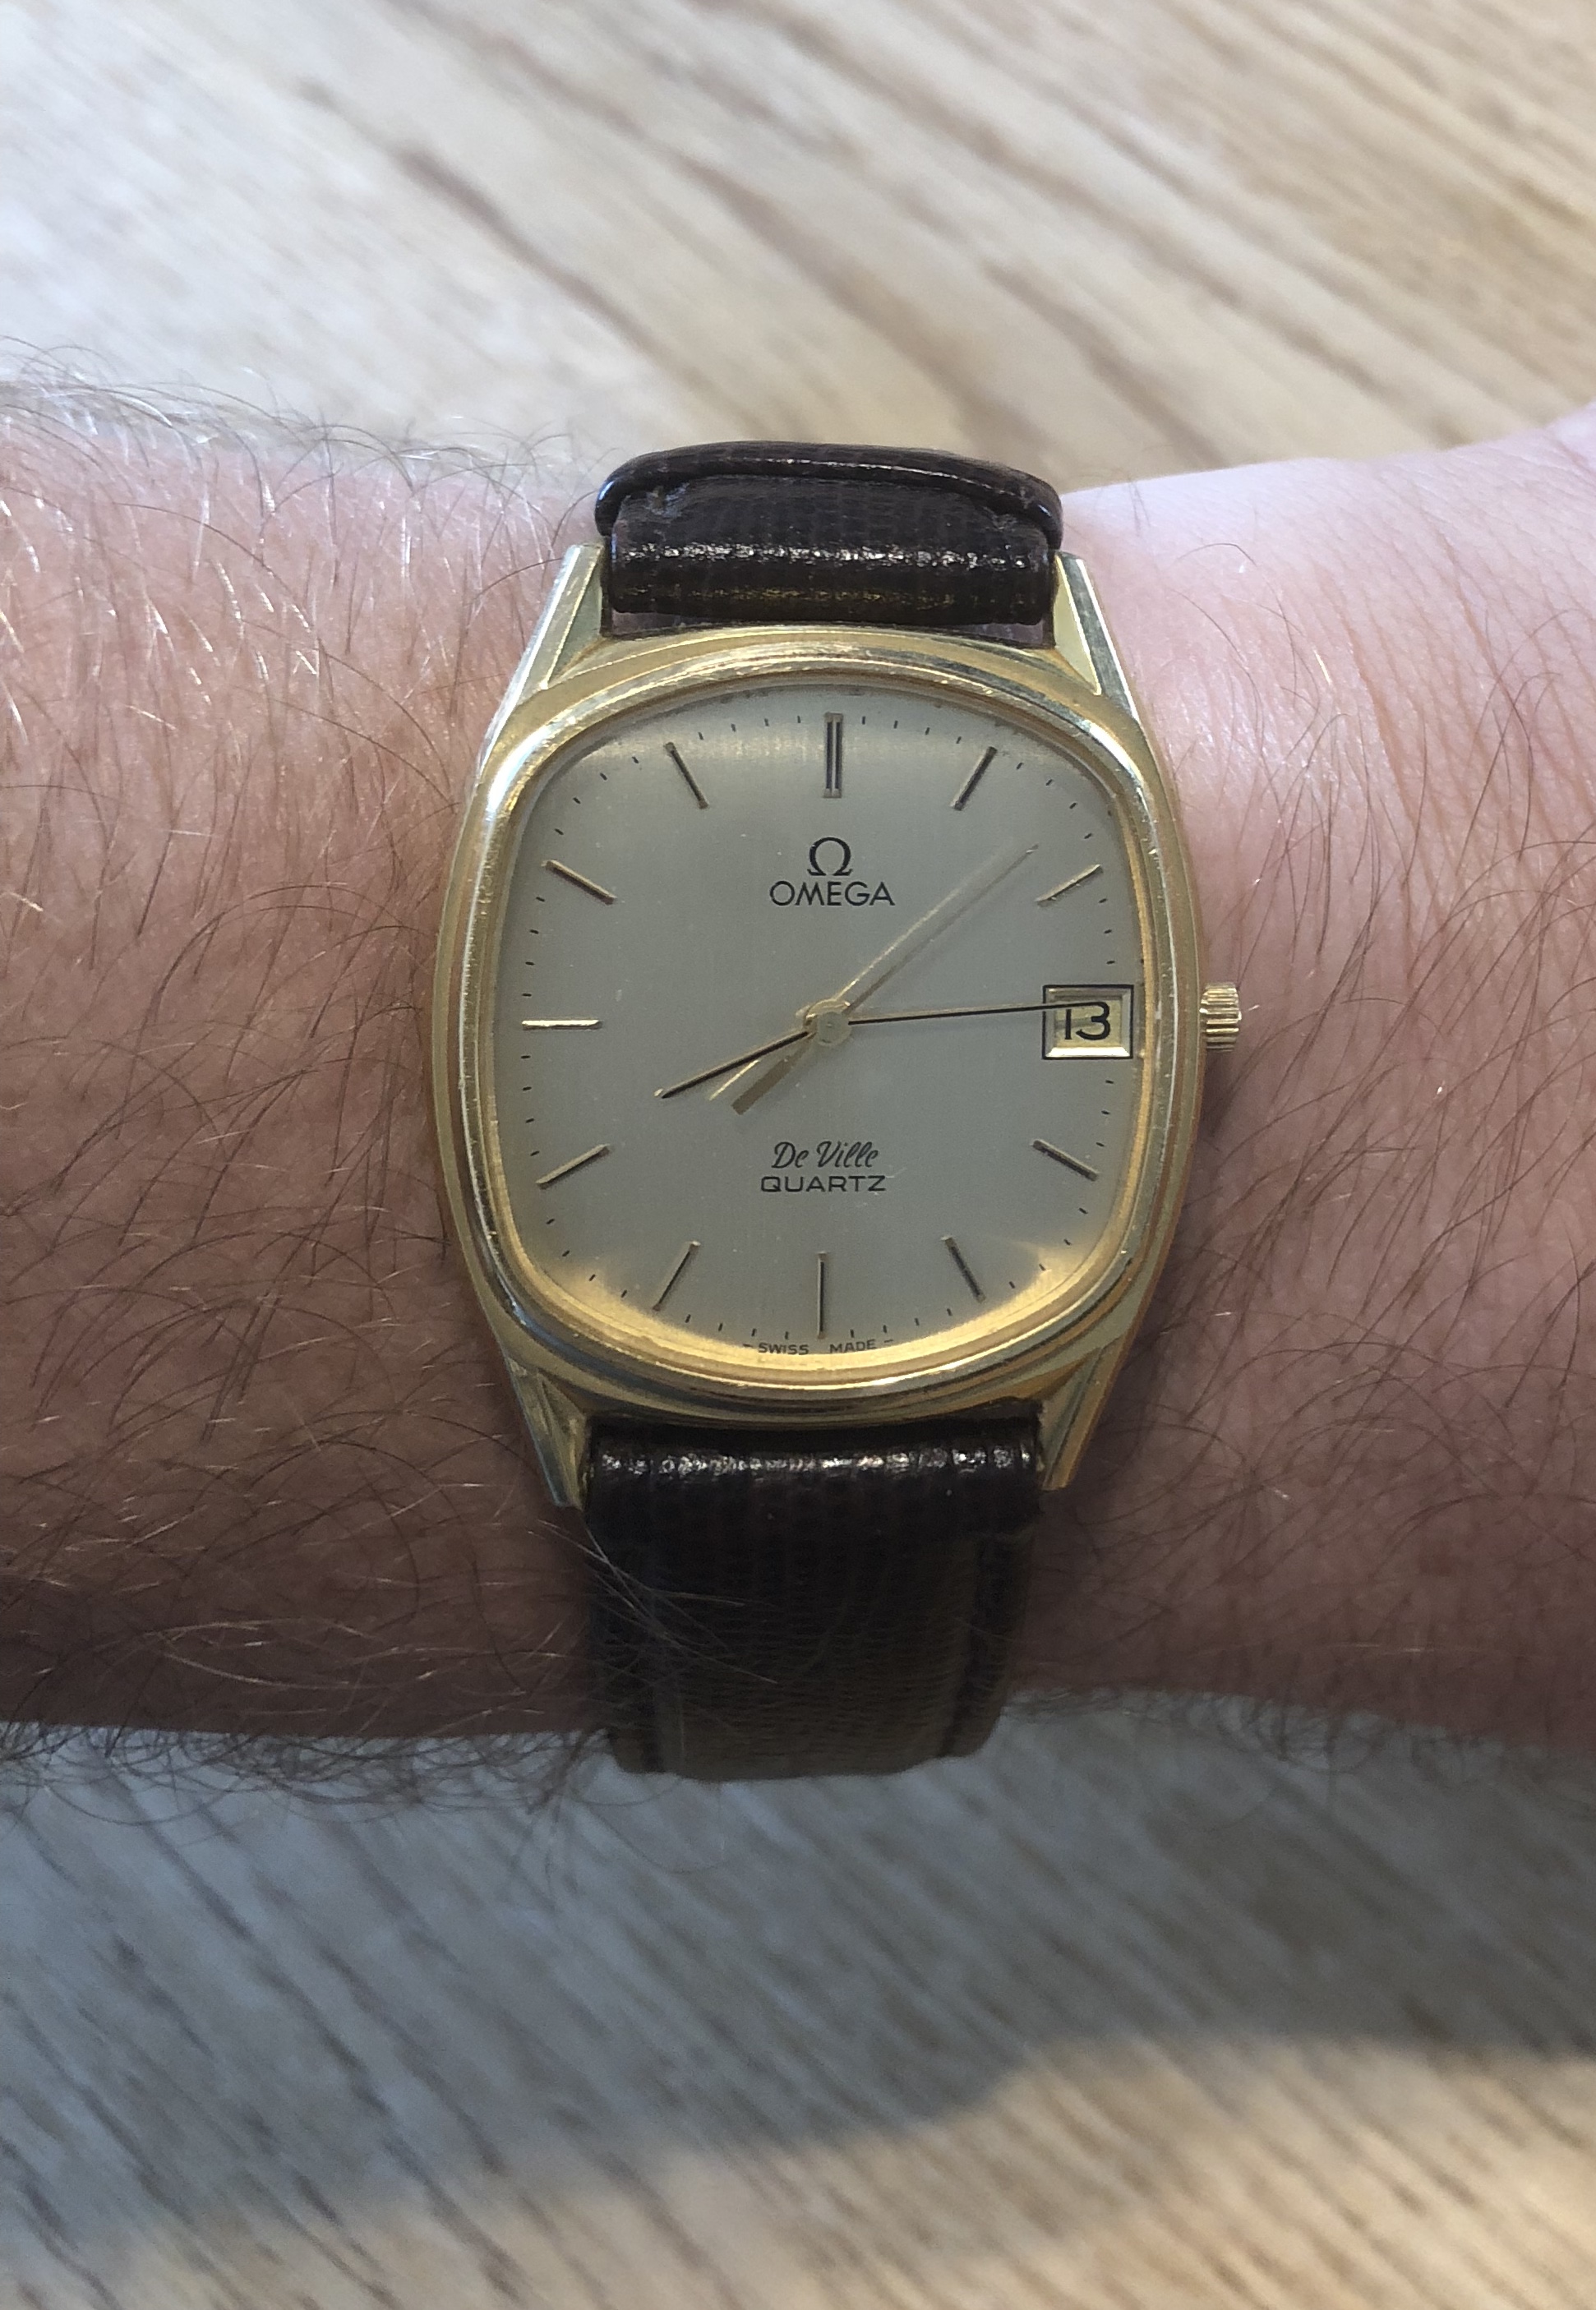 Early ‘80s Omega De Ville - thoughts? - Page 1 - Watches - PistonHeads